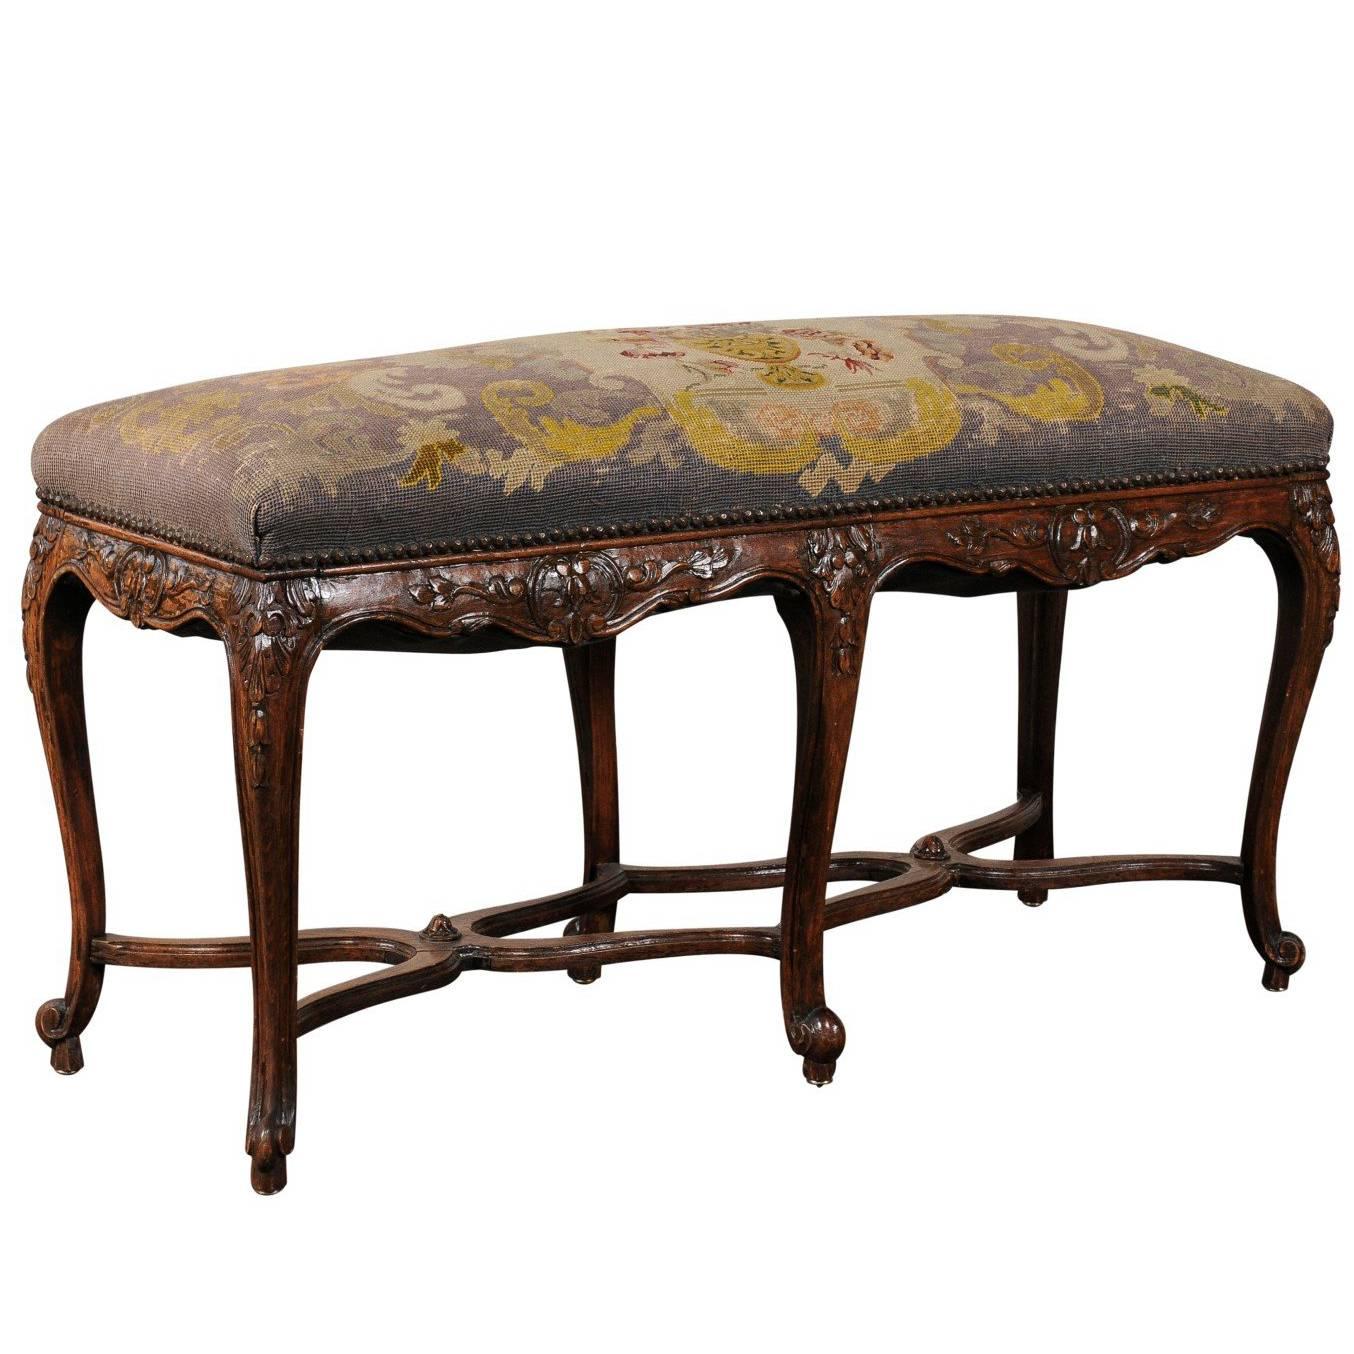 19th-20th Century French Louis XV Style Needlepoint Bench